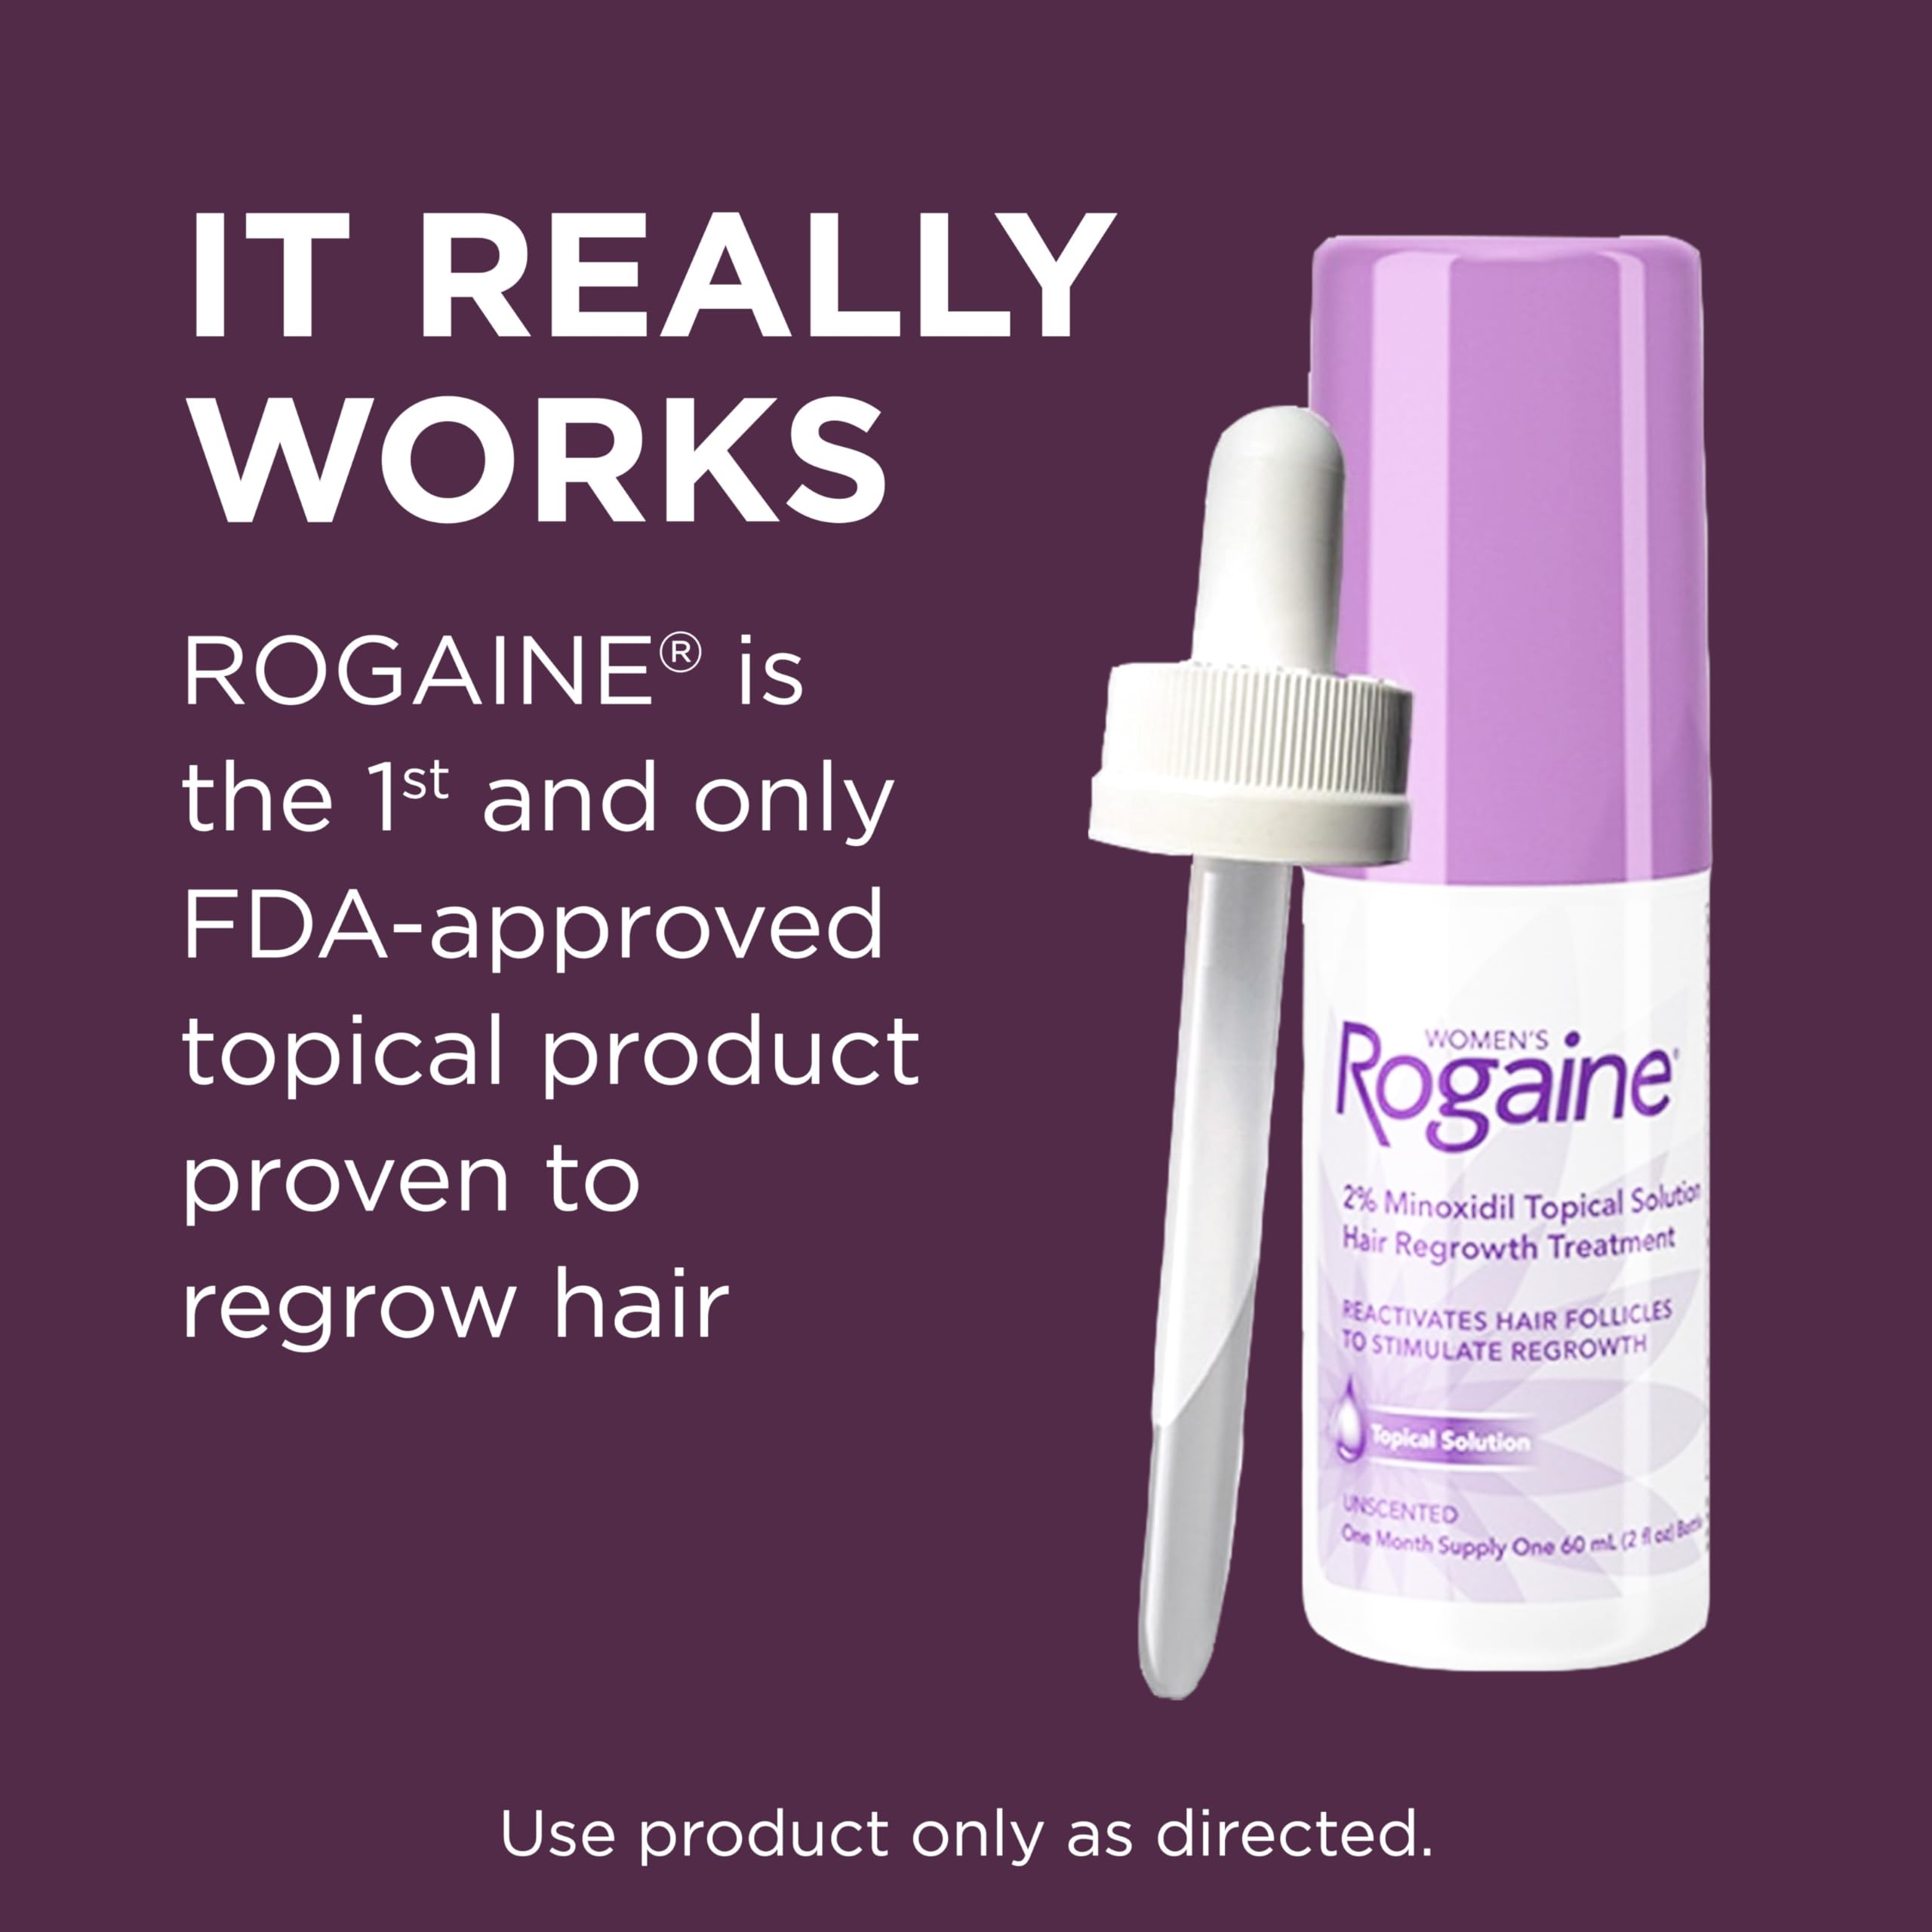 Women's Rogaine 2% Minoxidil Topical Solution for Hair Thinning and Loss, Topical Treatment & Women's 5% Minoxidil Foam for Thinning Hair & Loss, Topical Once-A-Day Hair Fall Treatment